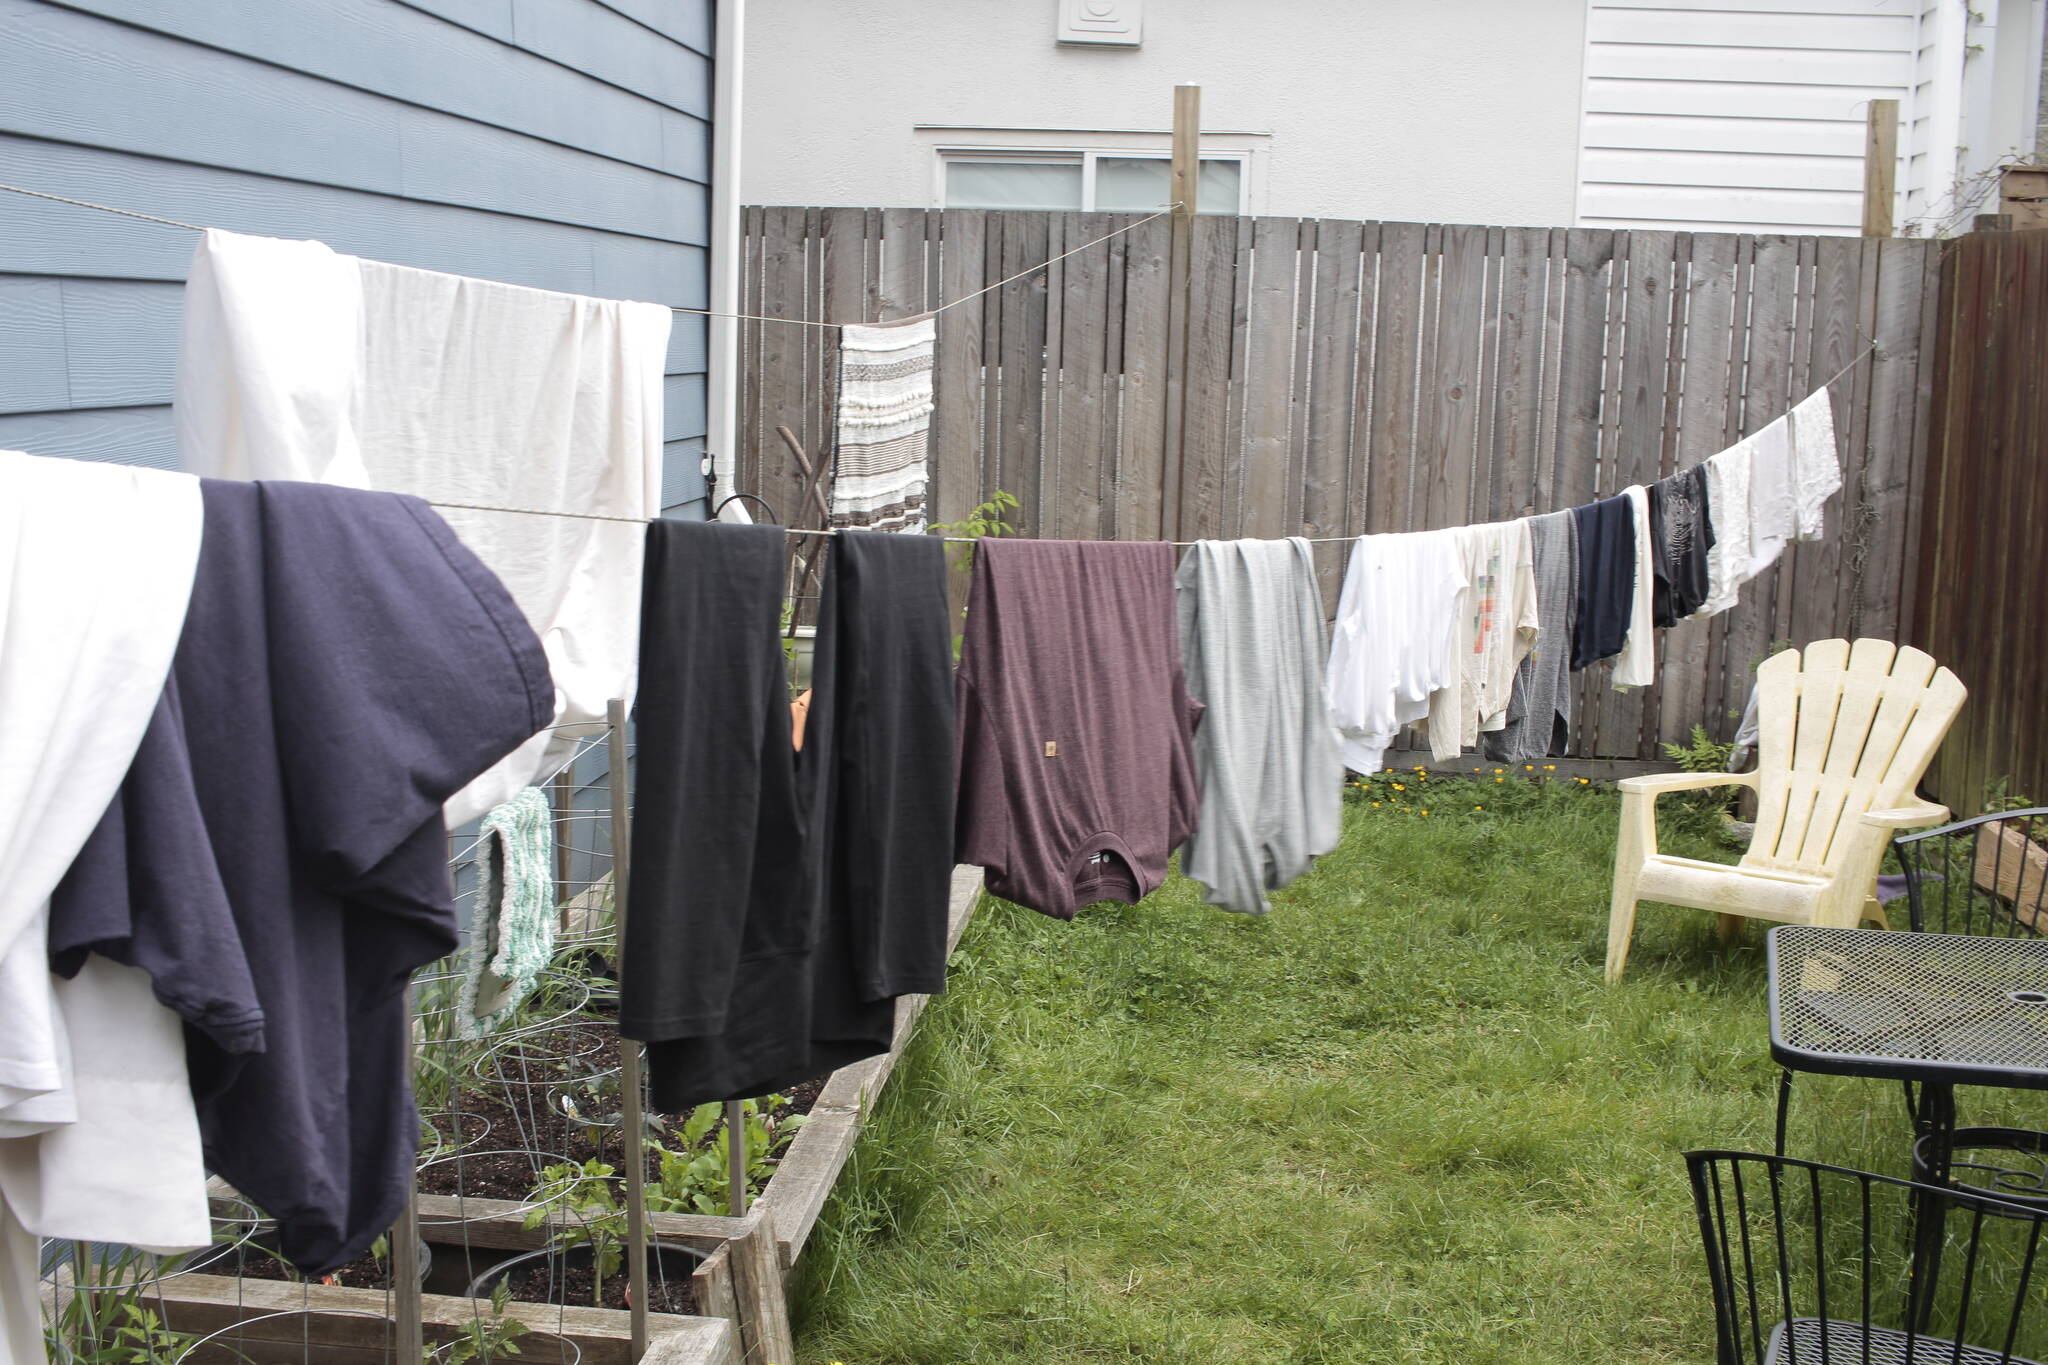 Clothesline act help B.C. meet climate goals - Campbell River Mirror